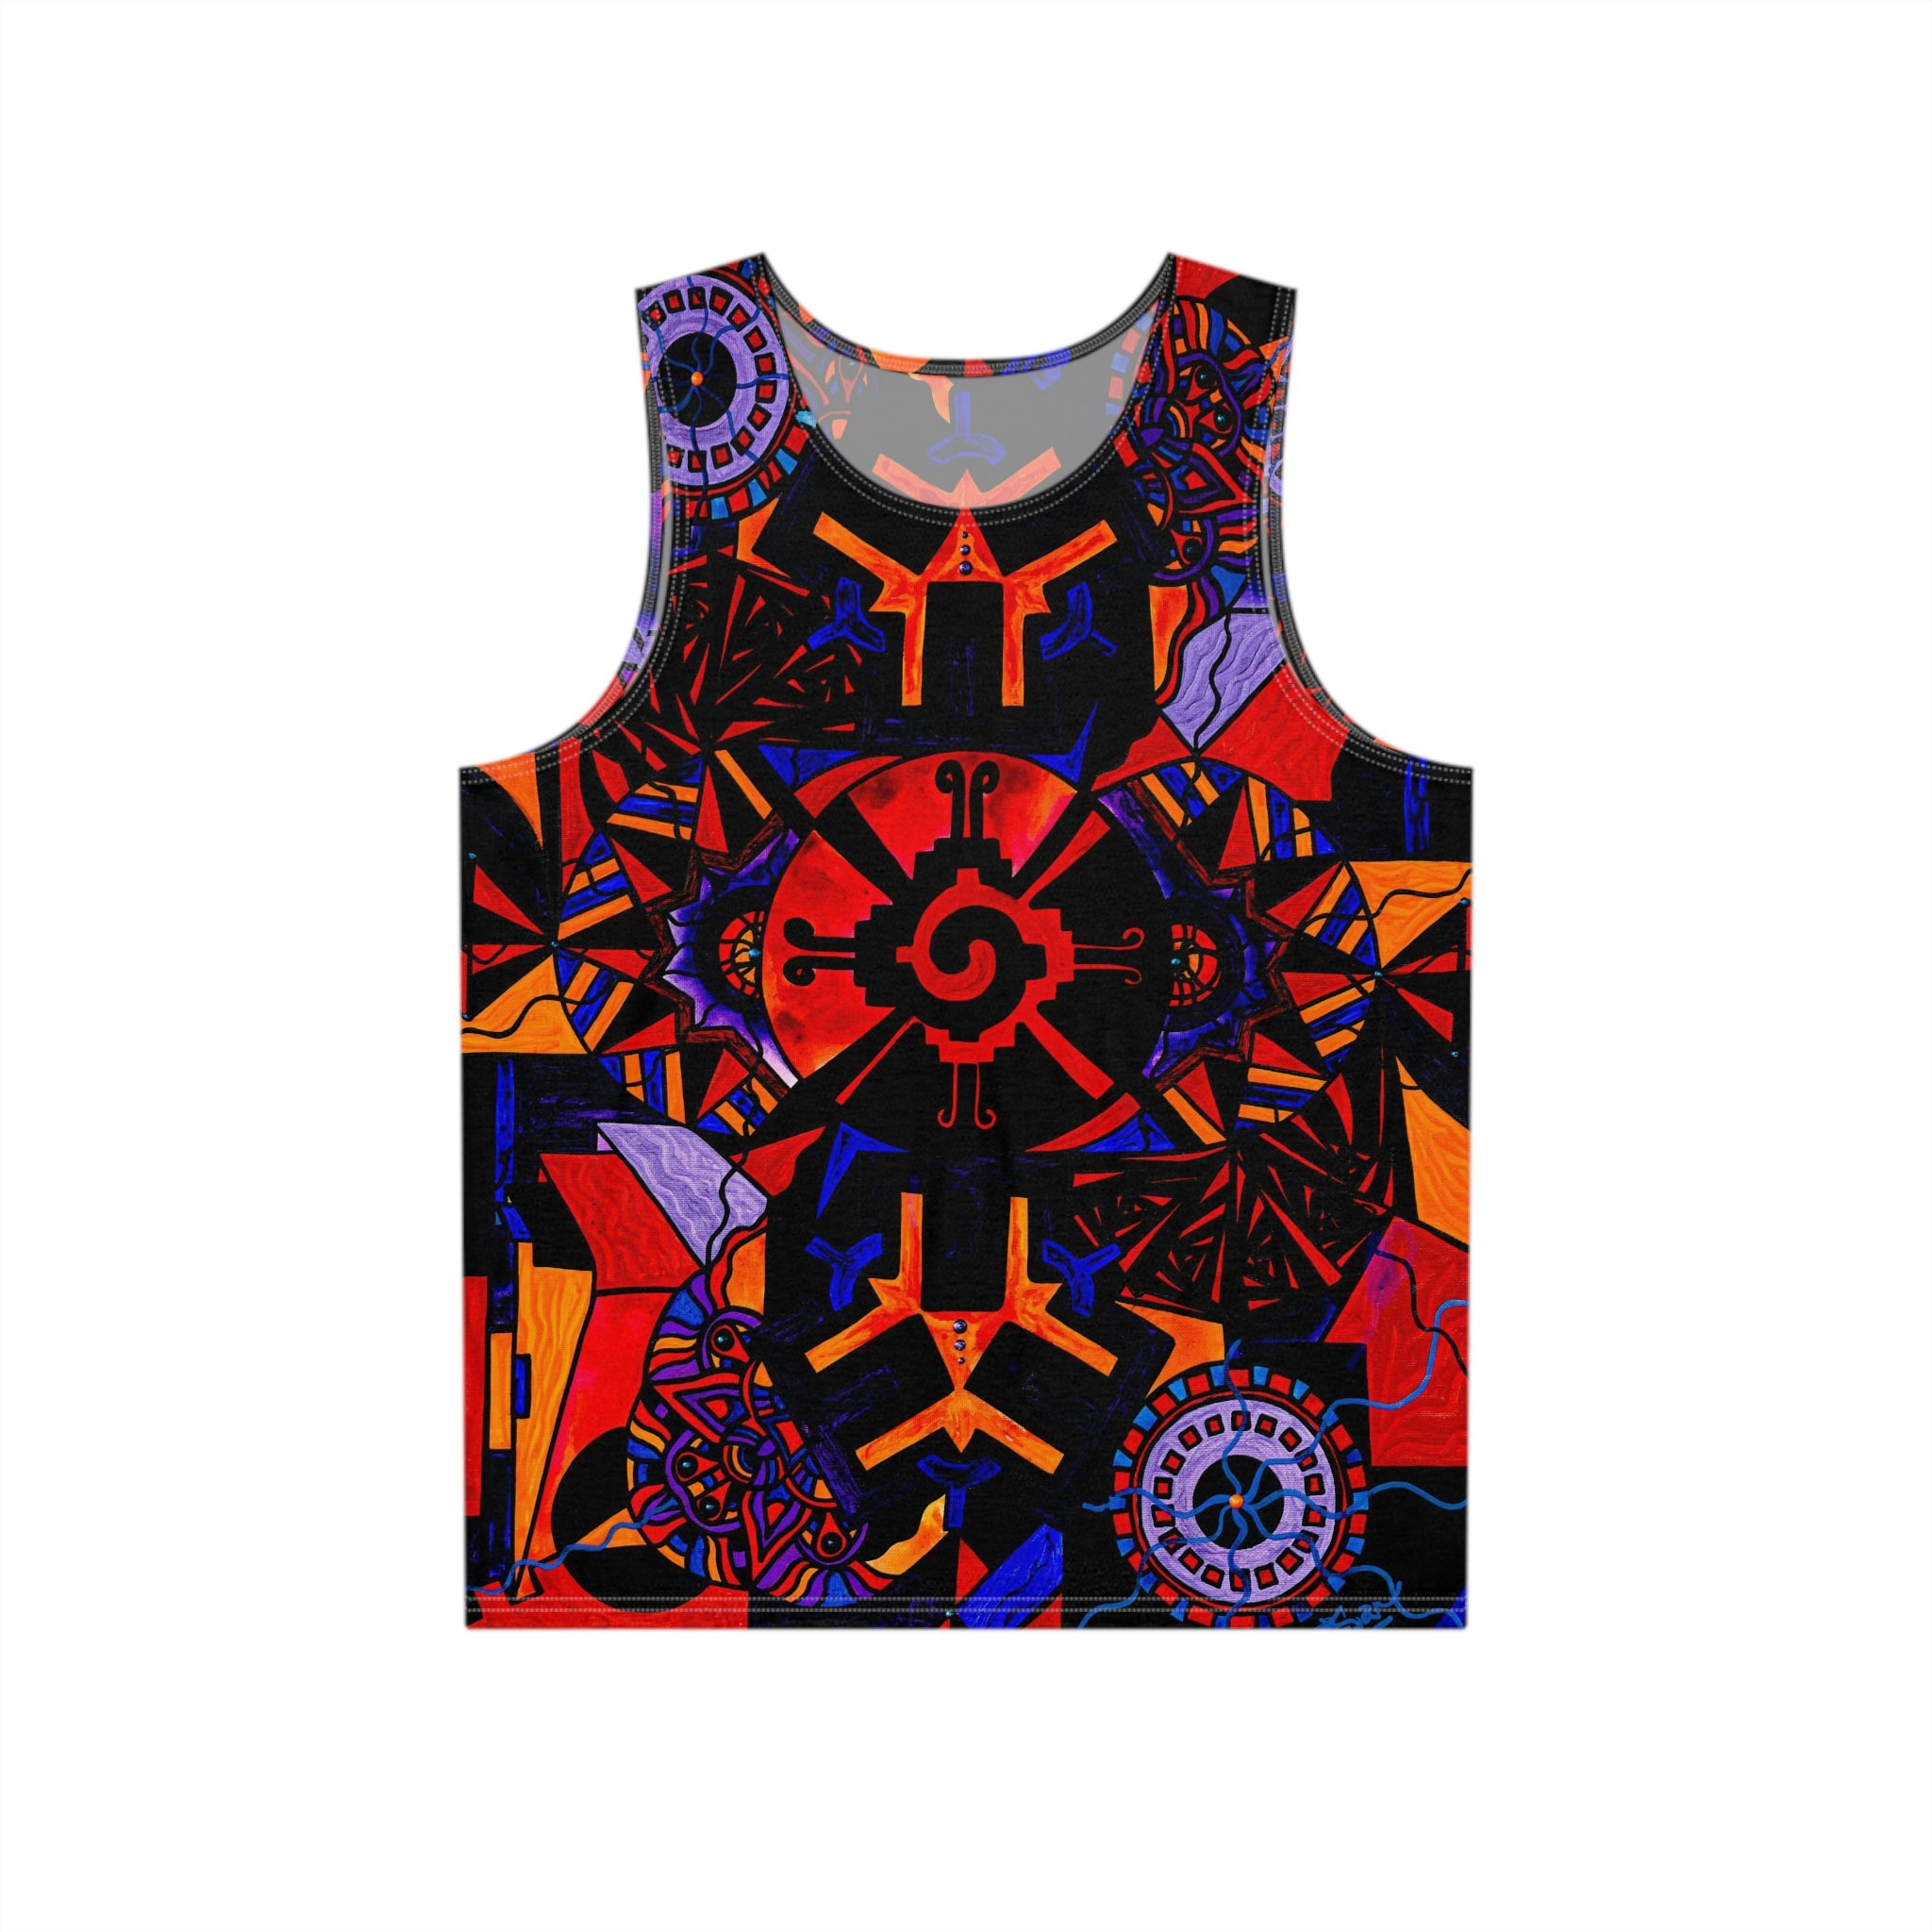 shop-for-the-latest-alnilam-strength-grid-mens-all-over-print-tank-top-fashion_1.jpg